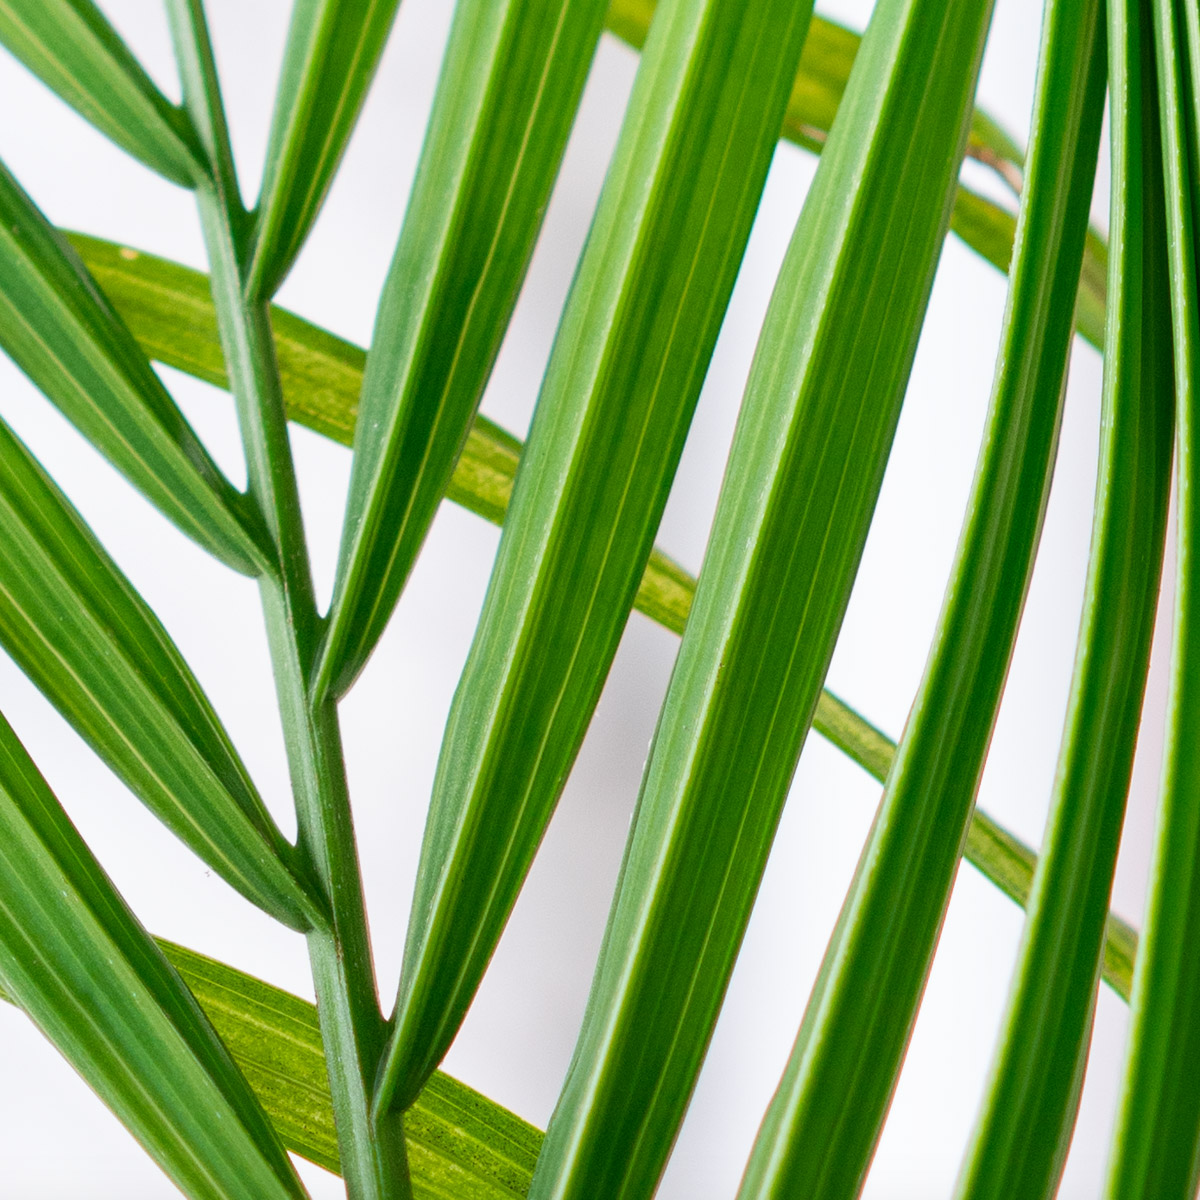 Detail image of a palm plant to show how grain in ISO shows up on photographic images.